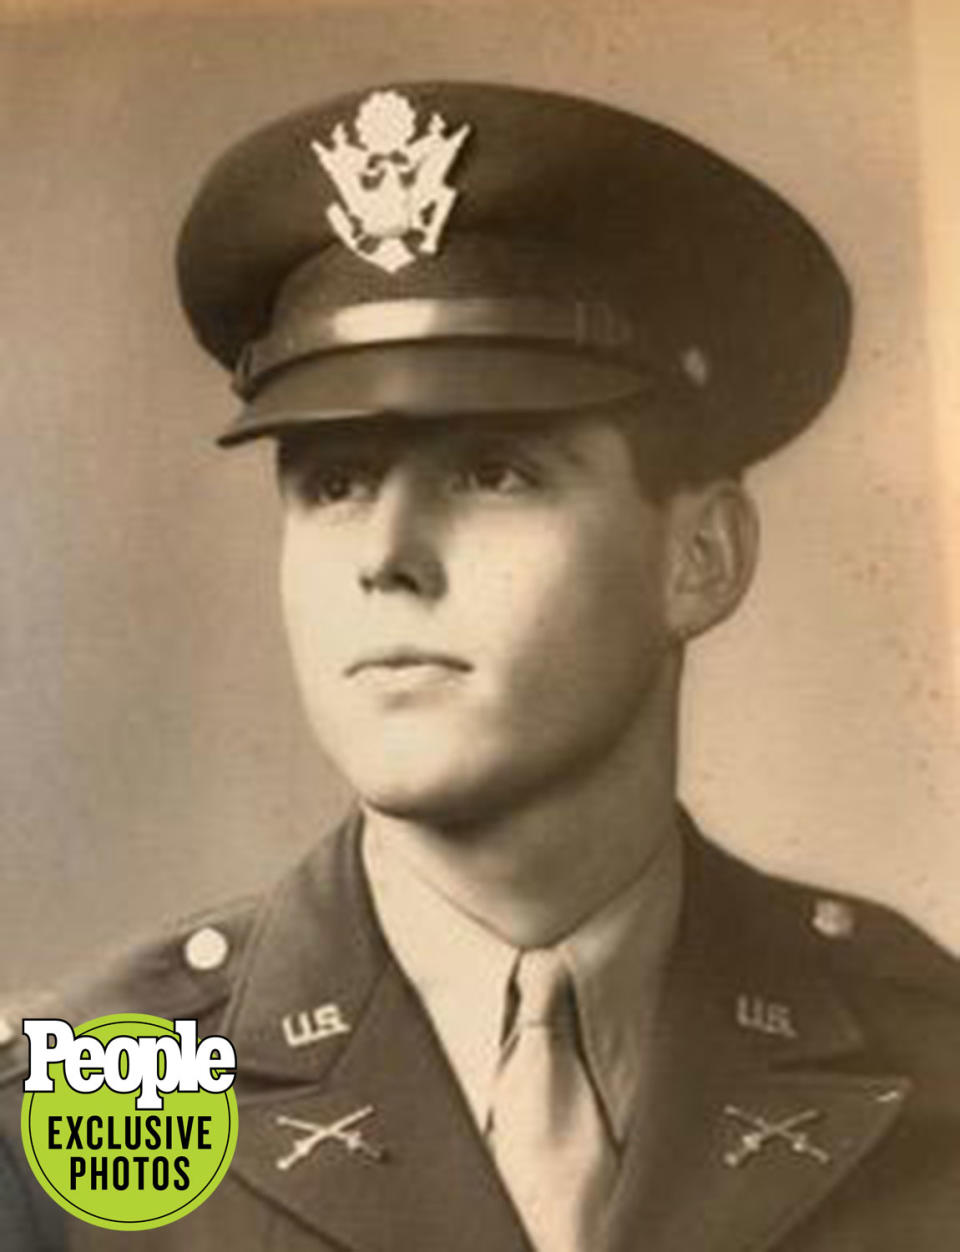 <p>My grandaddy — Bryan Yancey Owen — was born in Hopkinsville, Kentucky, and was inducted into the US Army while still in college in June of 1942. He met my Nanny before the war, but they were separated when he left for several assignments and when he served overseas.</p>